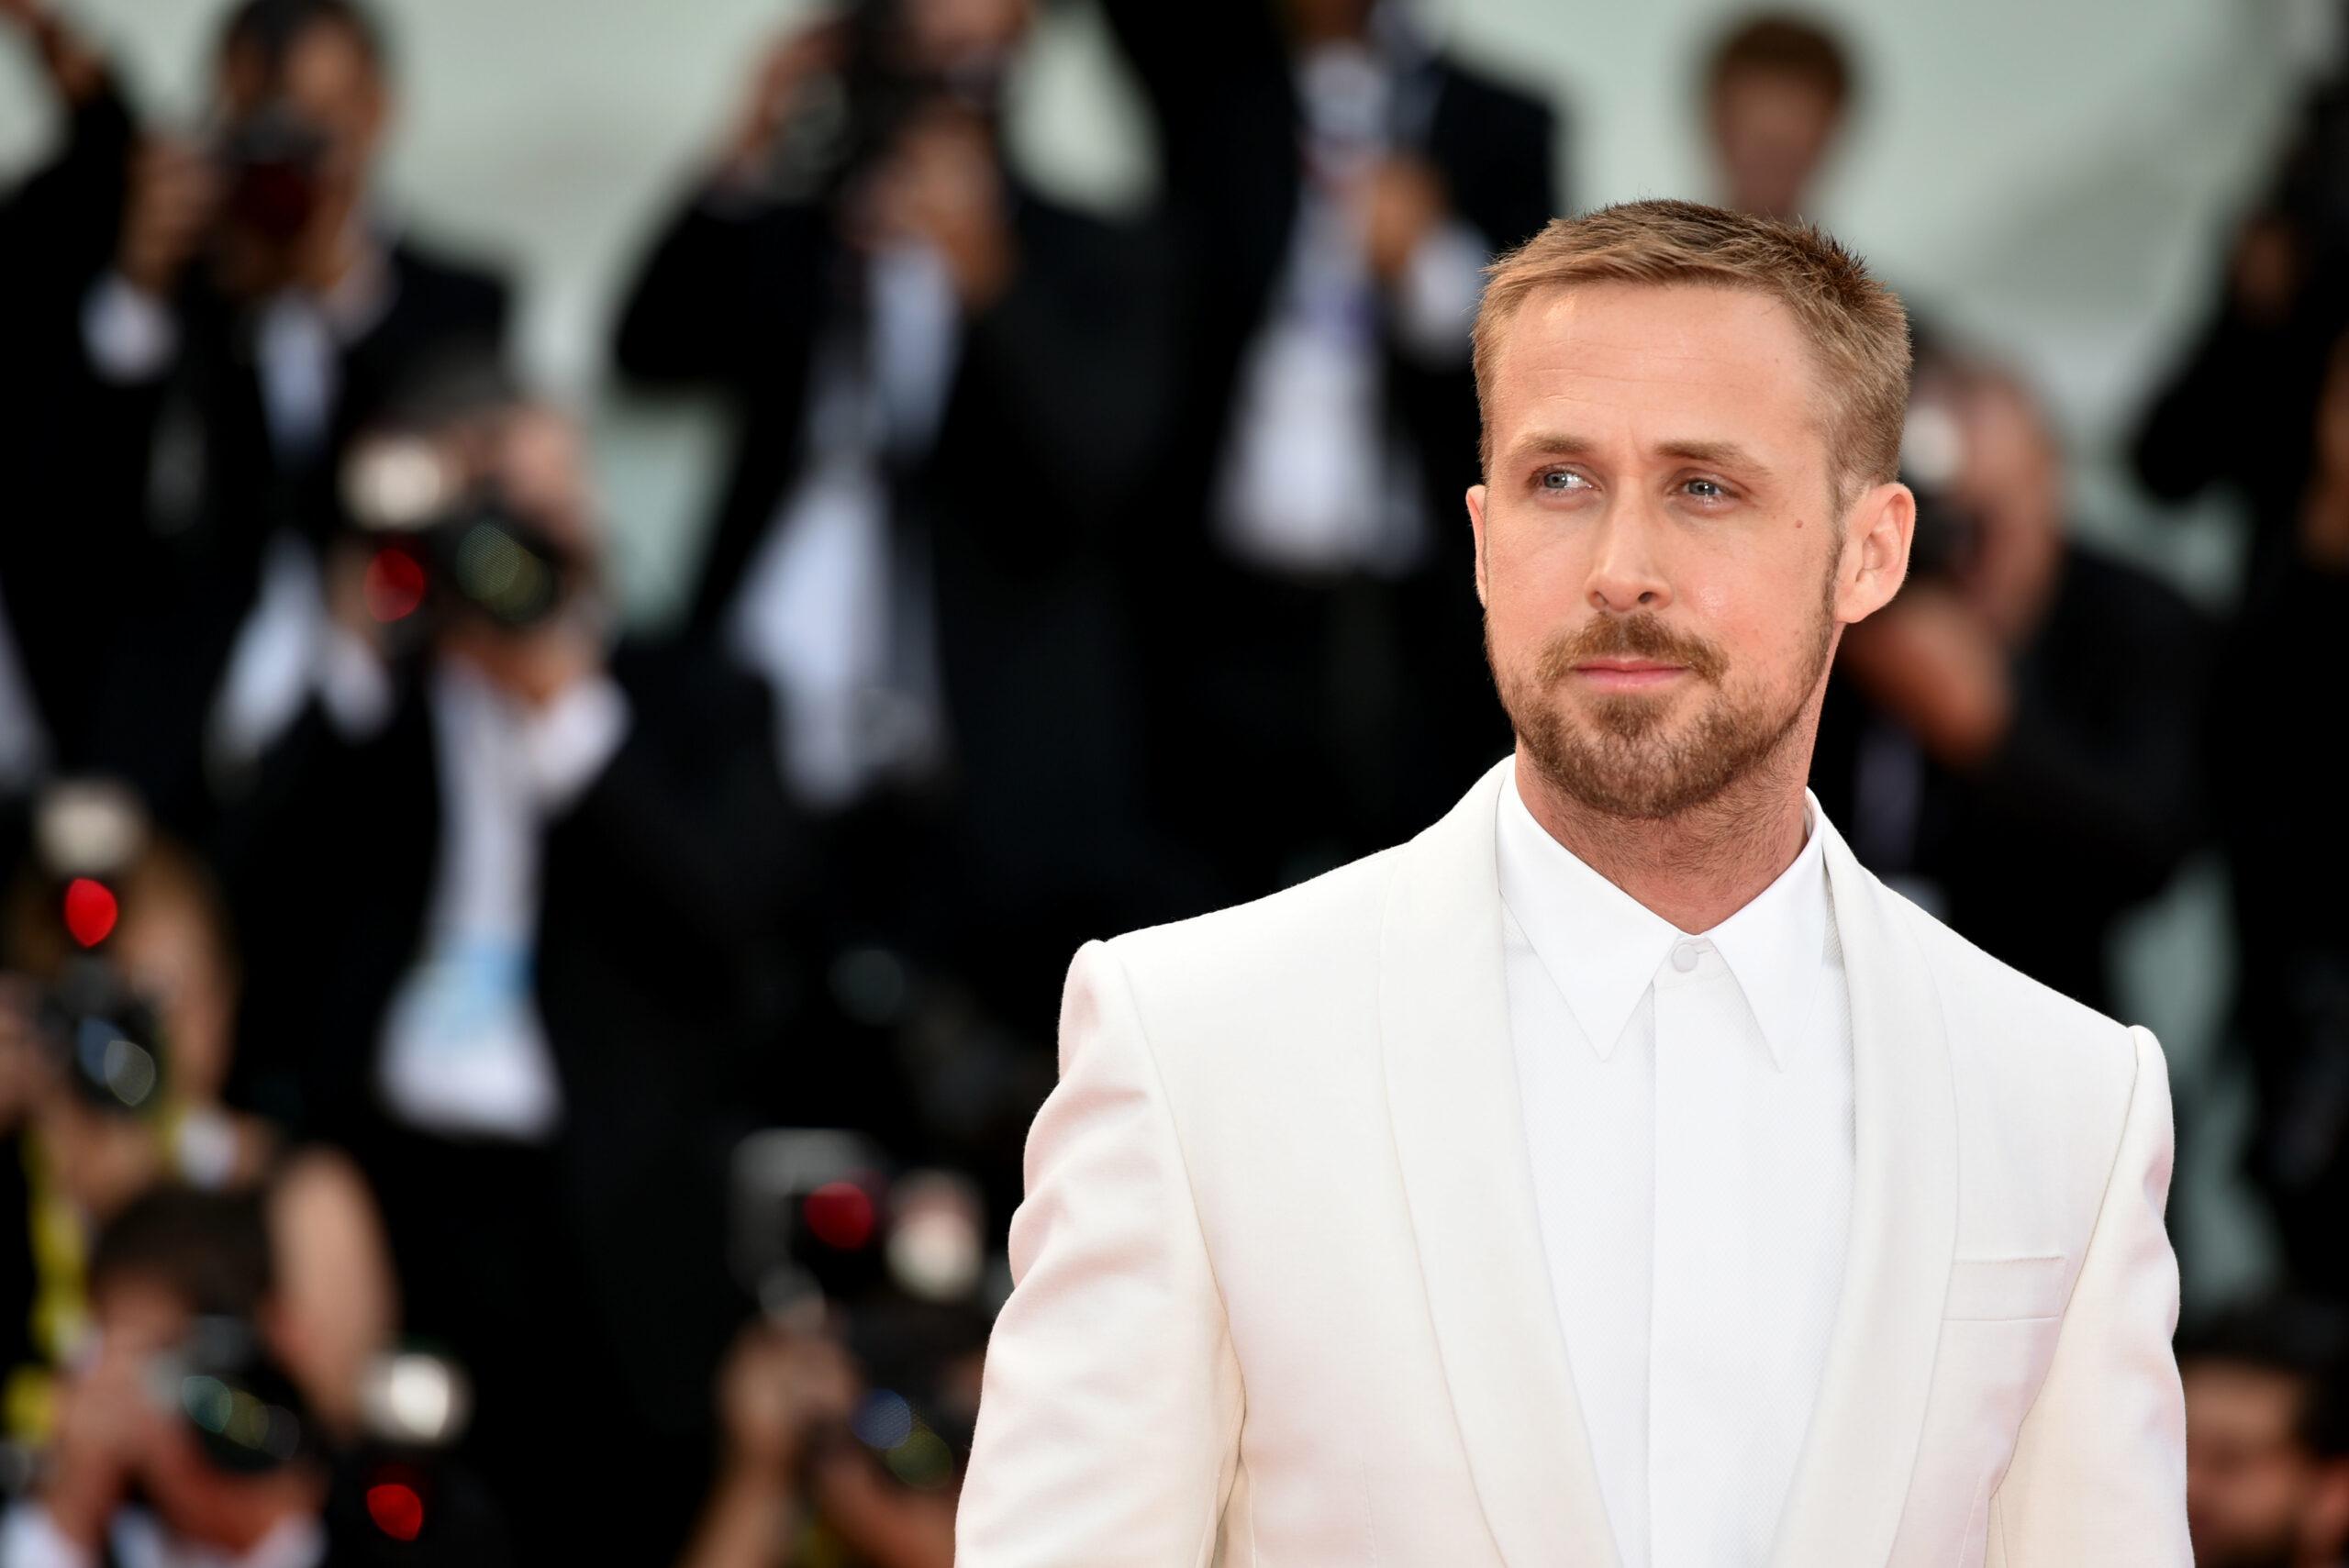 Ryan Gosling Talks Family And Parenting With Wife Eva Mendes Amid The Pandemic